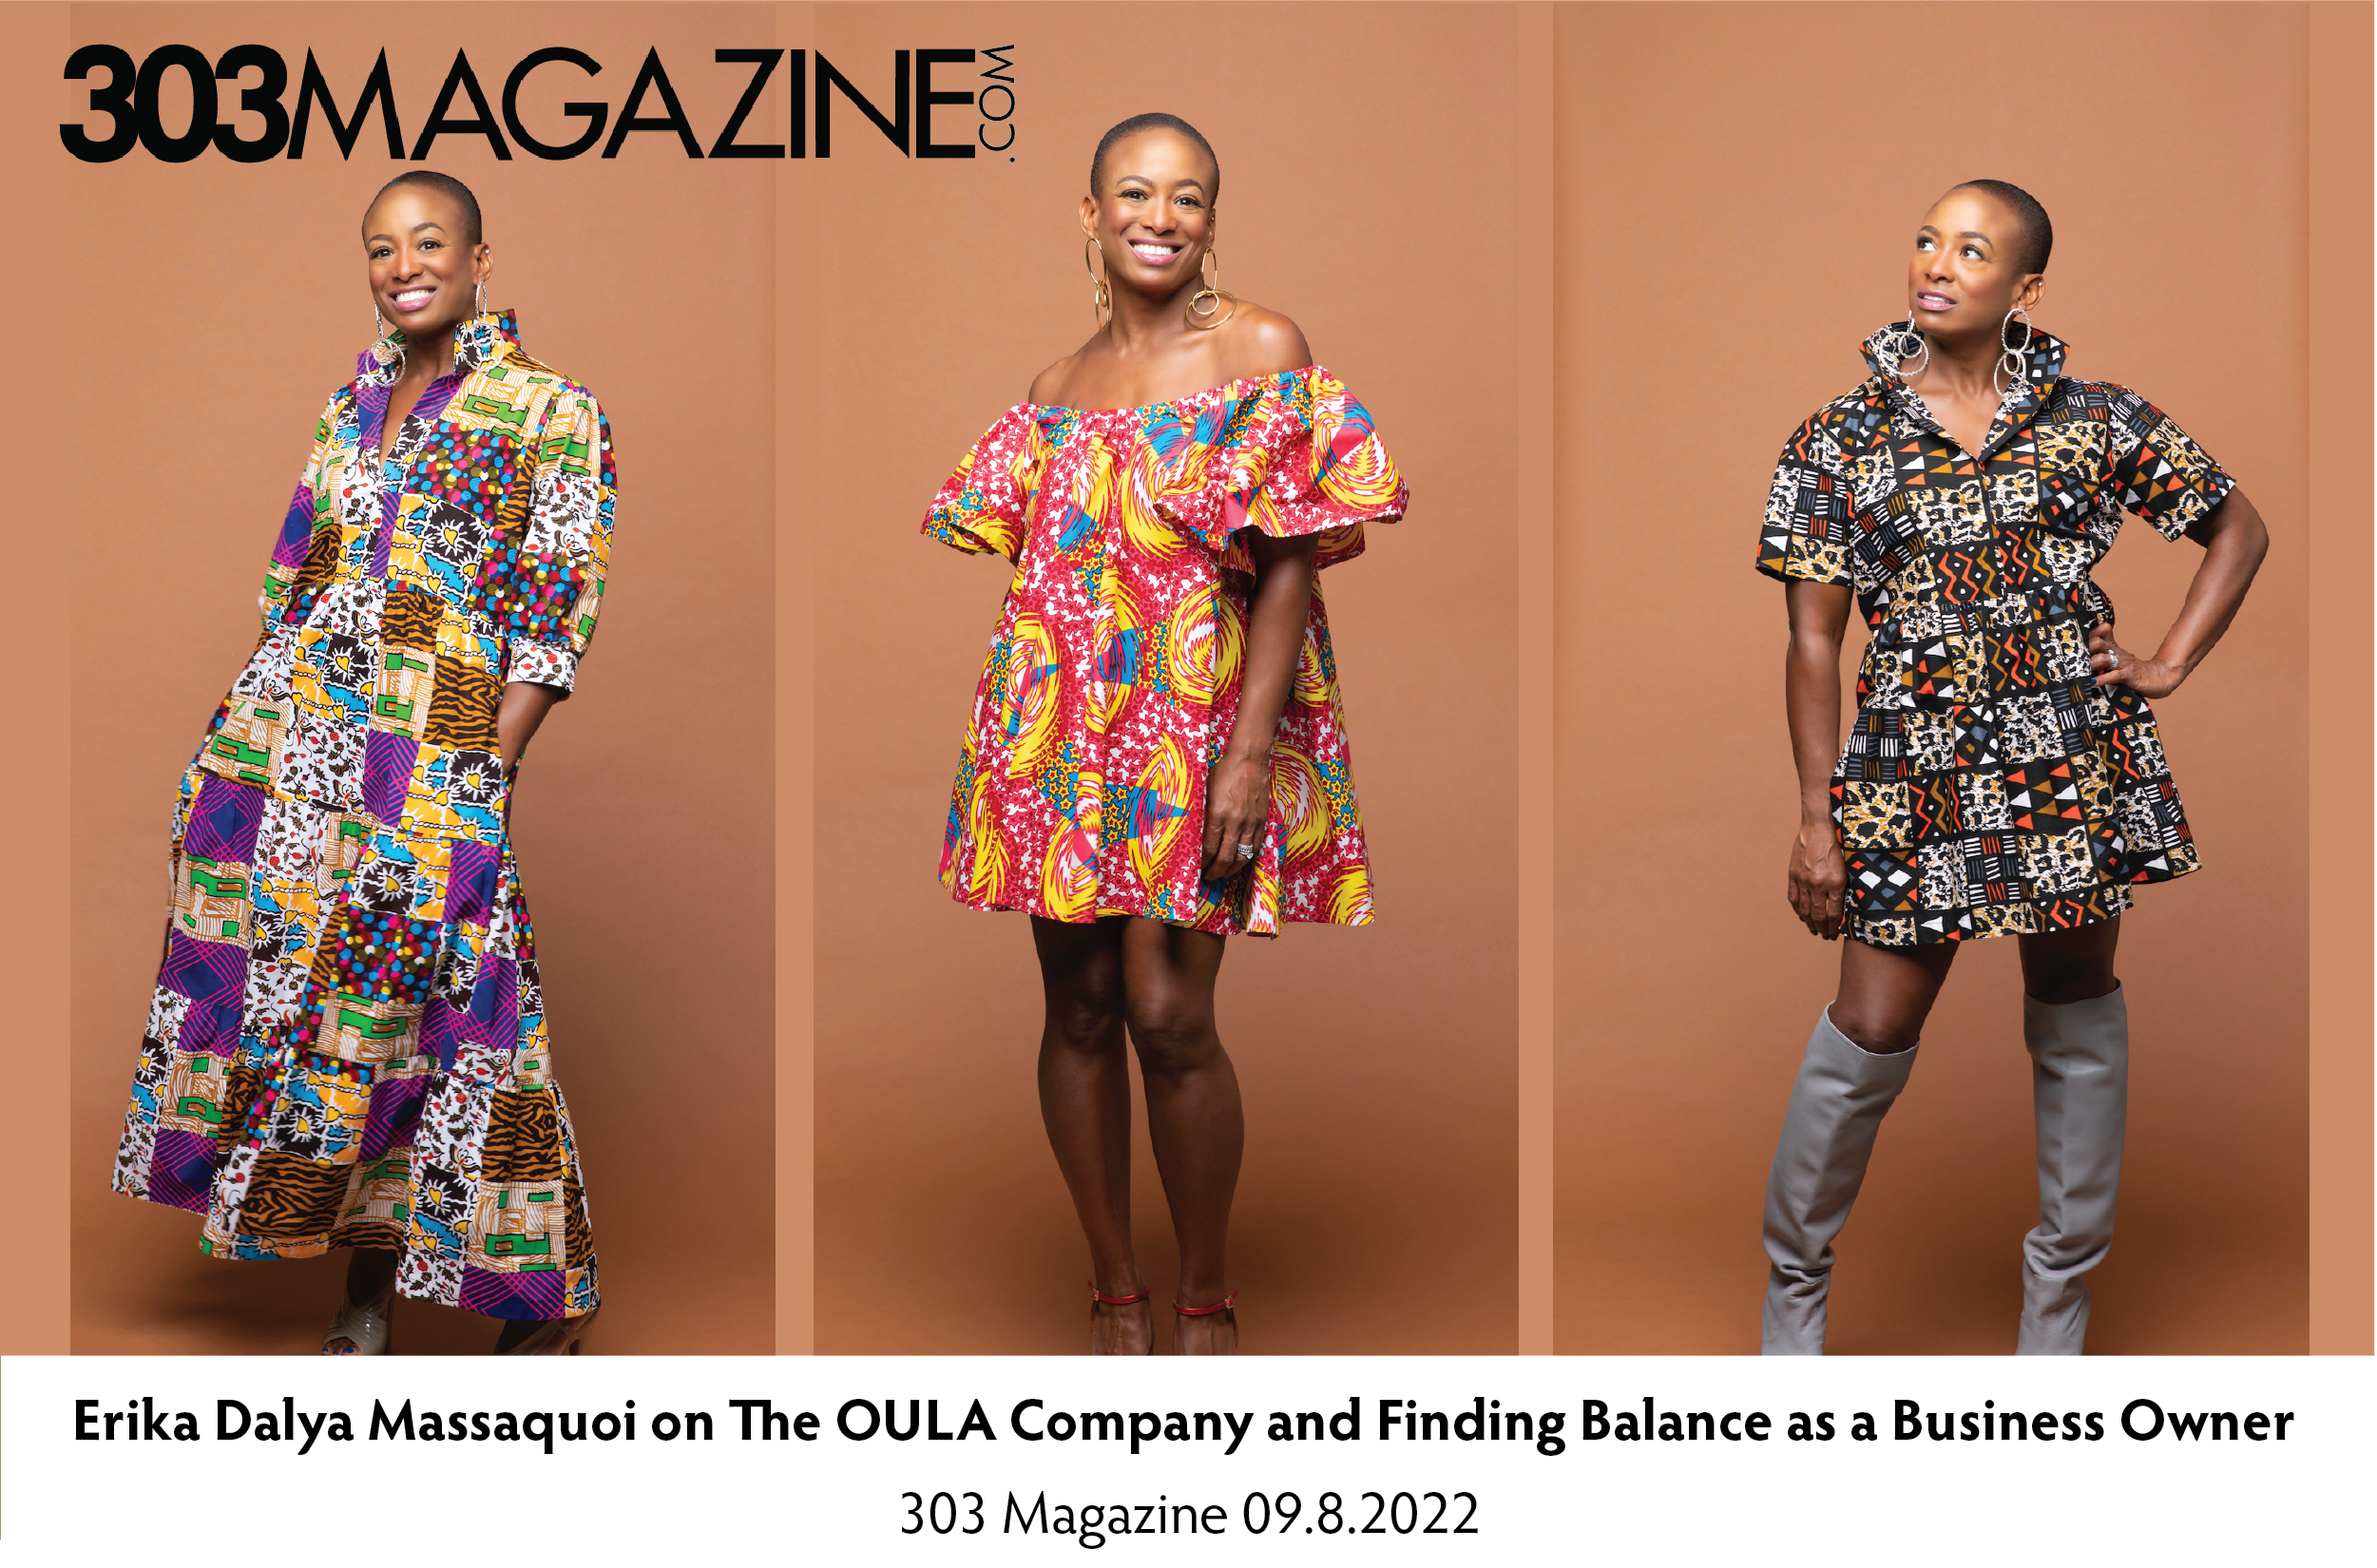 Erika Dalya Massaquoi on The OULA Company and Finding Balance as a Business Owner